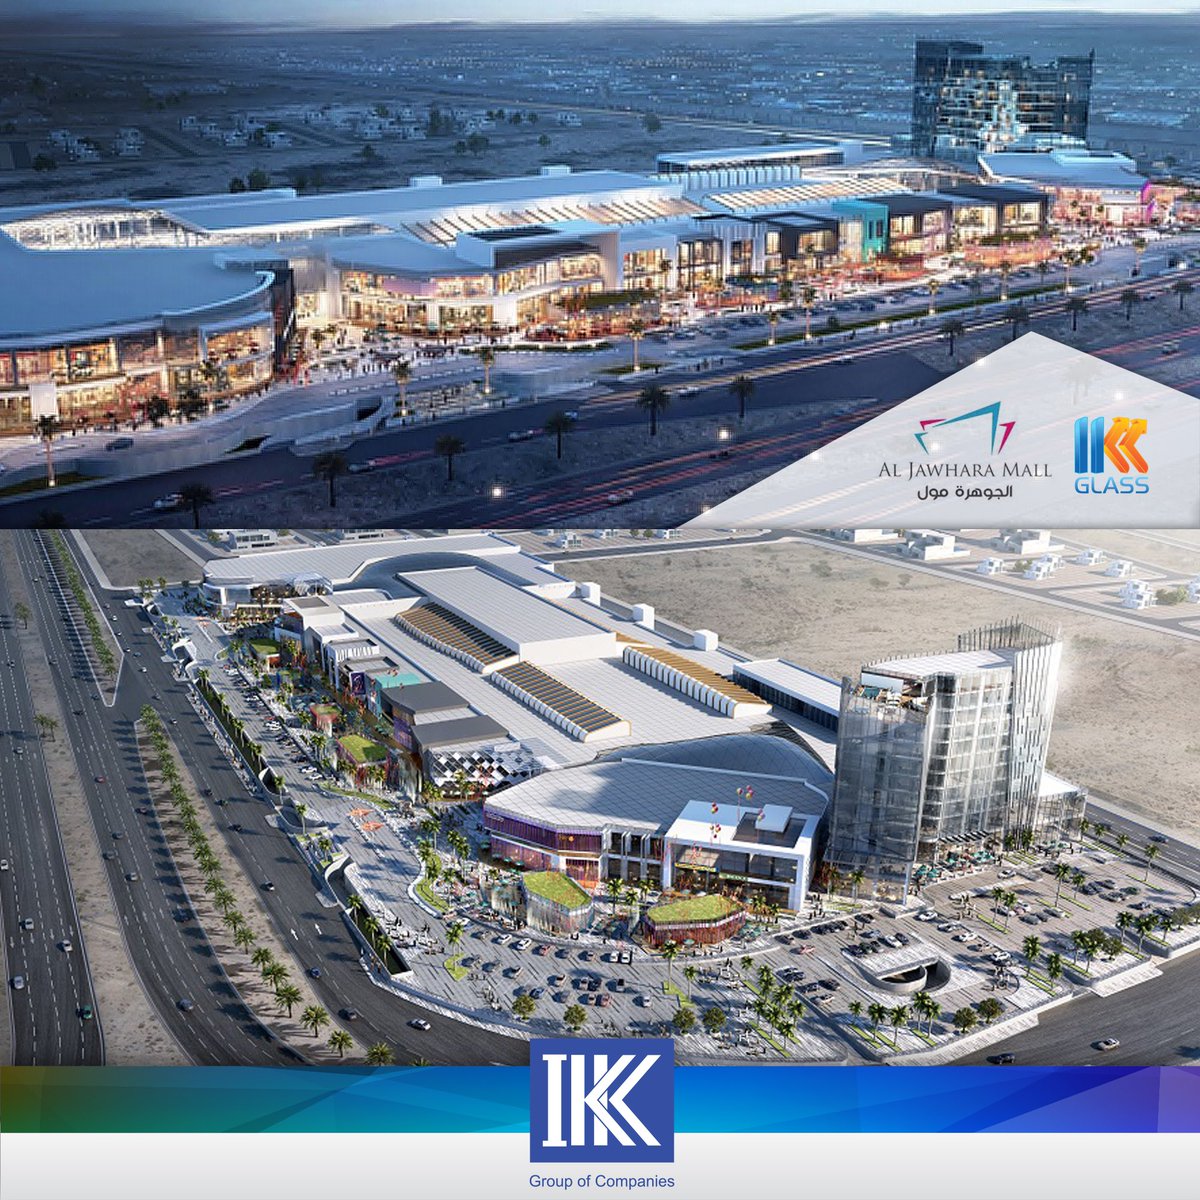 We are pleased to announce that IKK Glass works Co. was awarded the Al-Jawharah Mall Project located in Jeddah. With Applying DFI Coating Technology on the Glass.#ikkgroup_sa #glass #mall #jeddah_city #projedct #bigprojects #aljawahar #aljawaharamall #ikk_sistercompanies